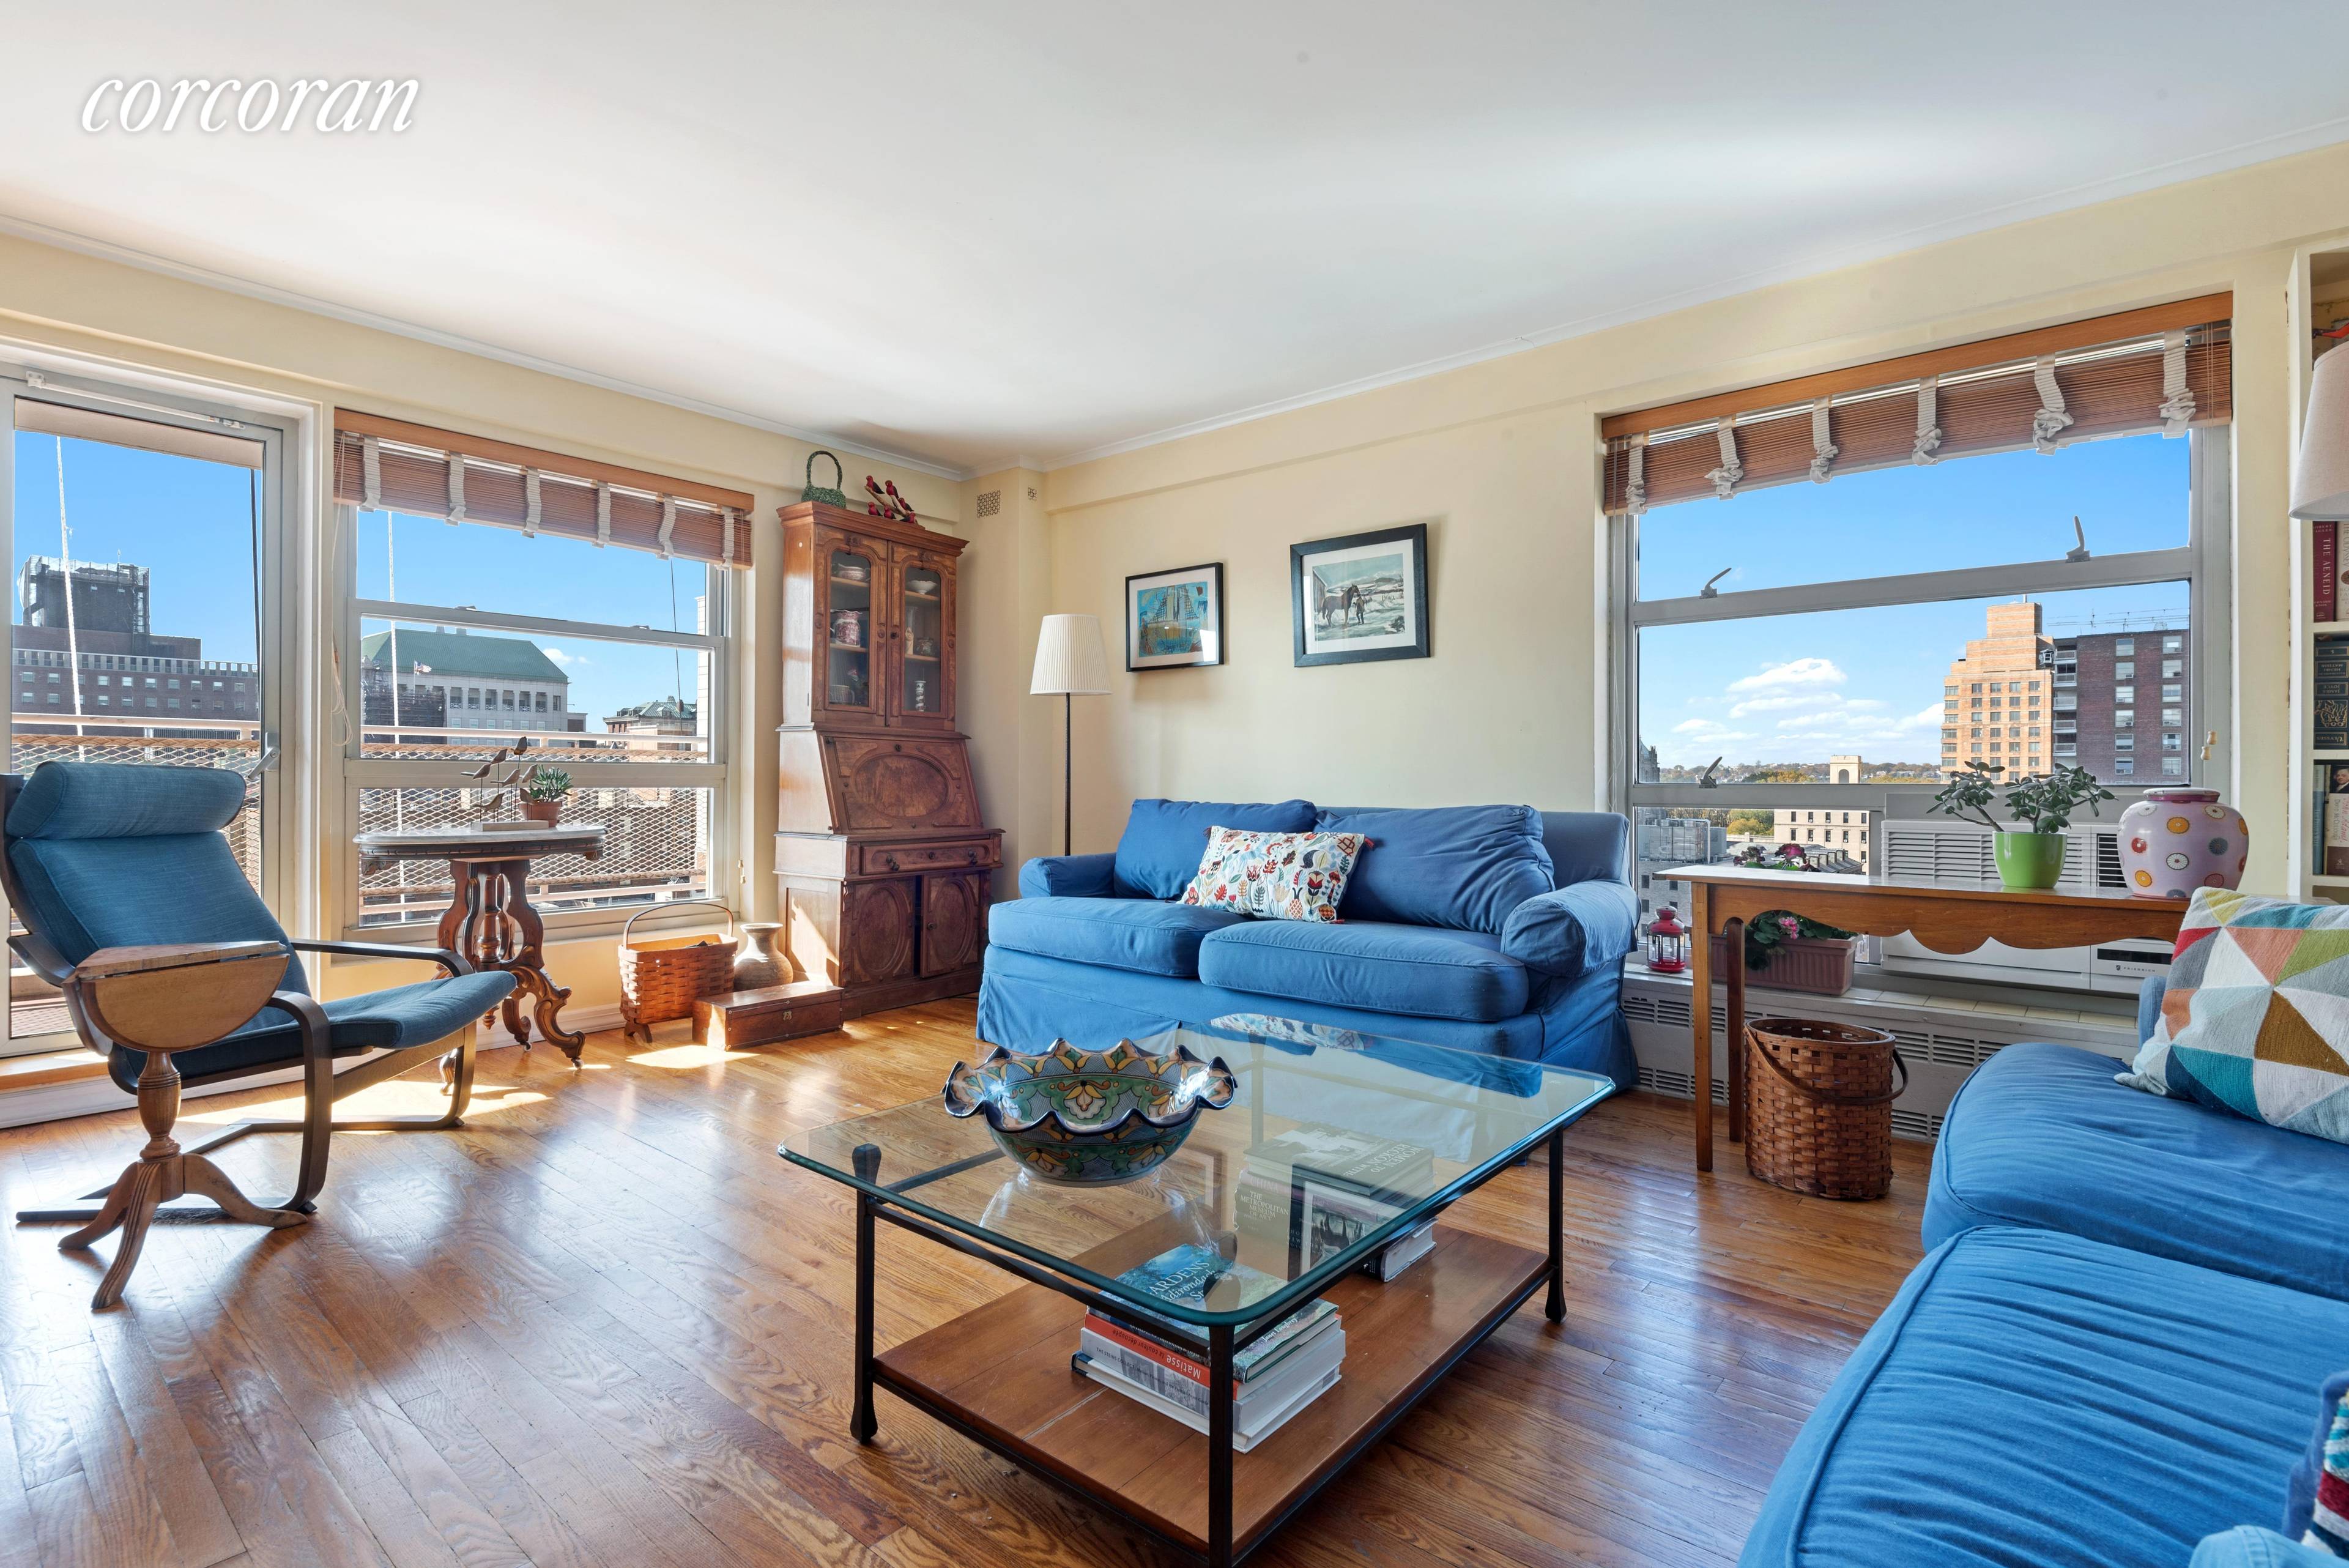 501 West 123rd Street. Be AWED by breathtaking VIEWS from the terrace of this move in, thoughtfully renovated apartment, located in the most desirable Morningside Heights residential complex.